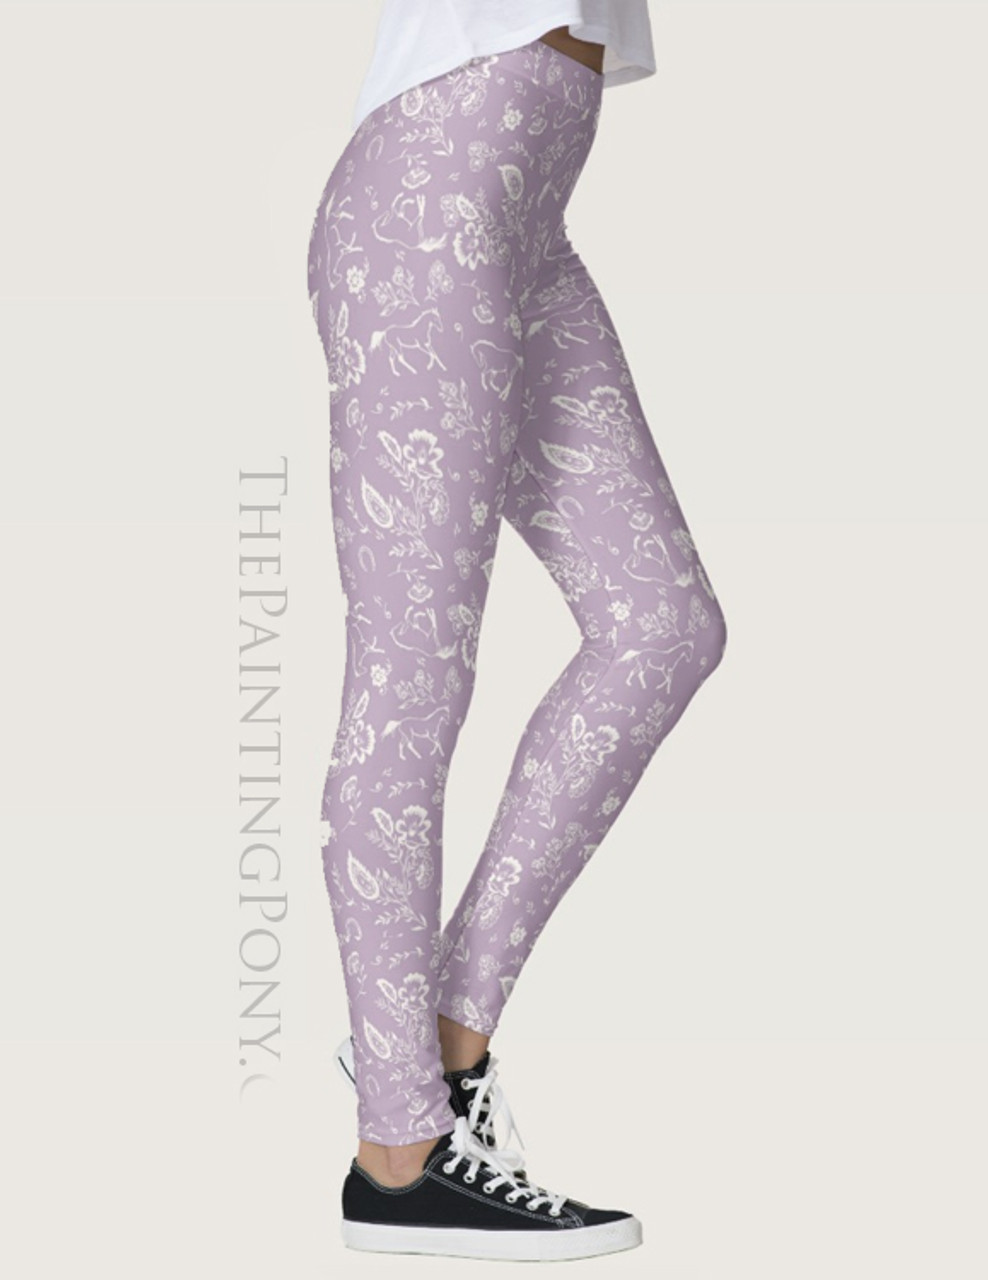 Country Floral Horses Pattern Equestrian Leggings (More Colors ...